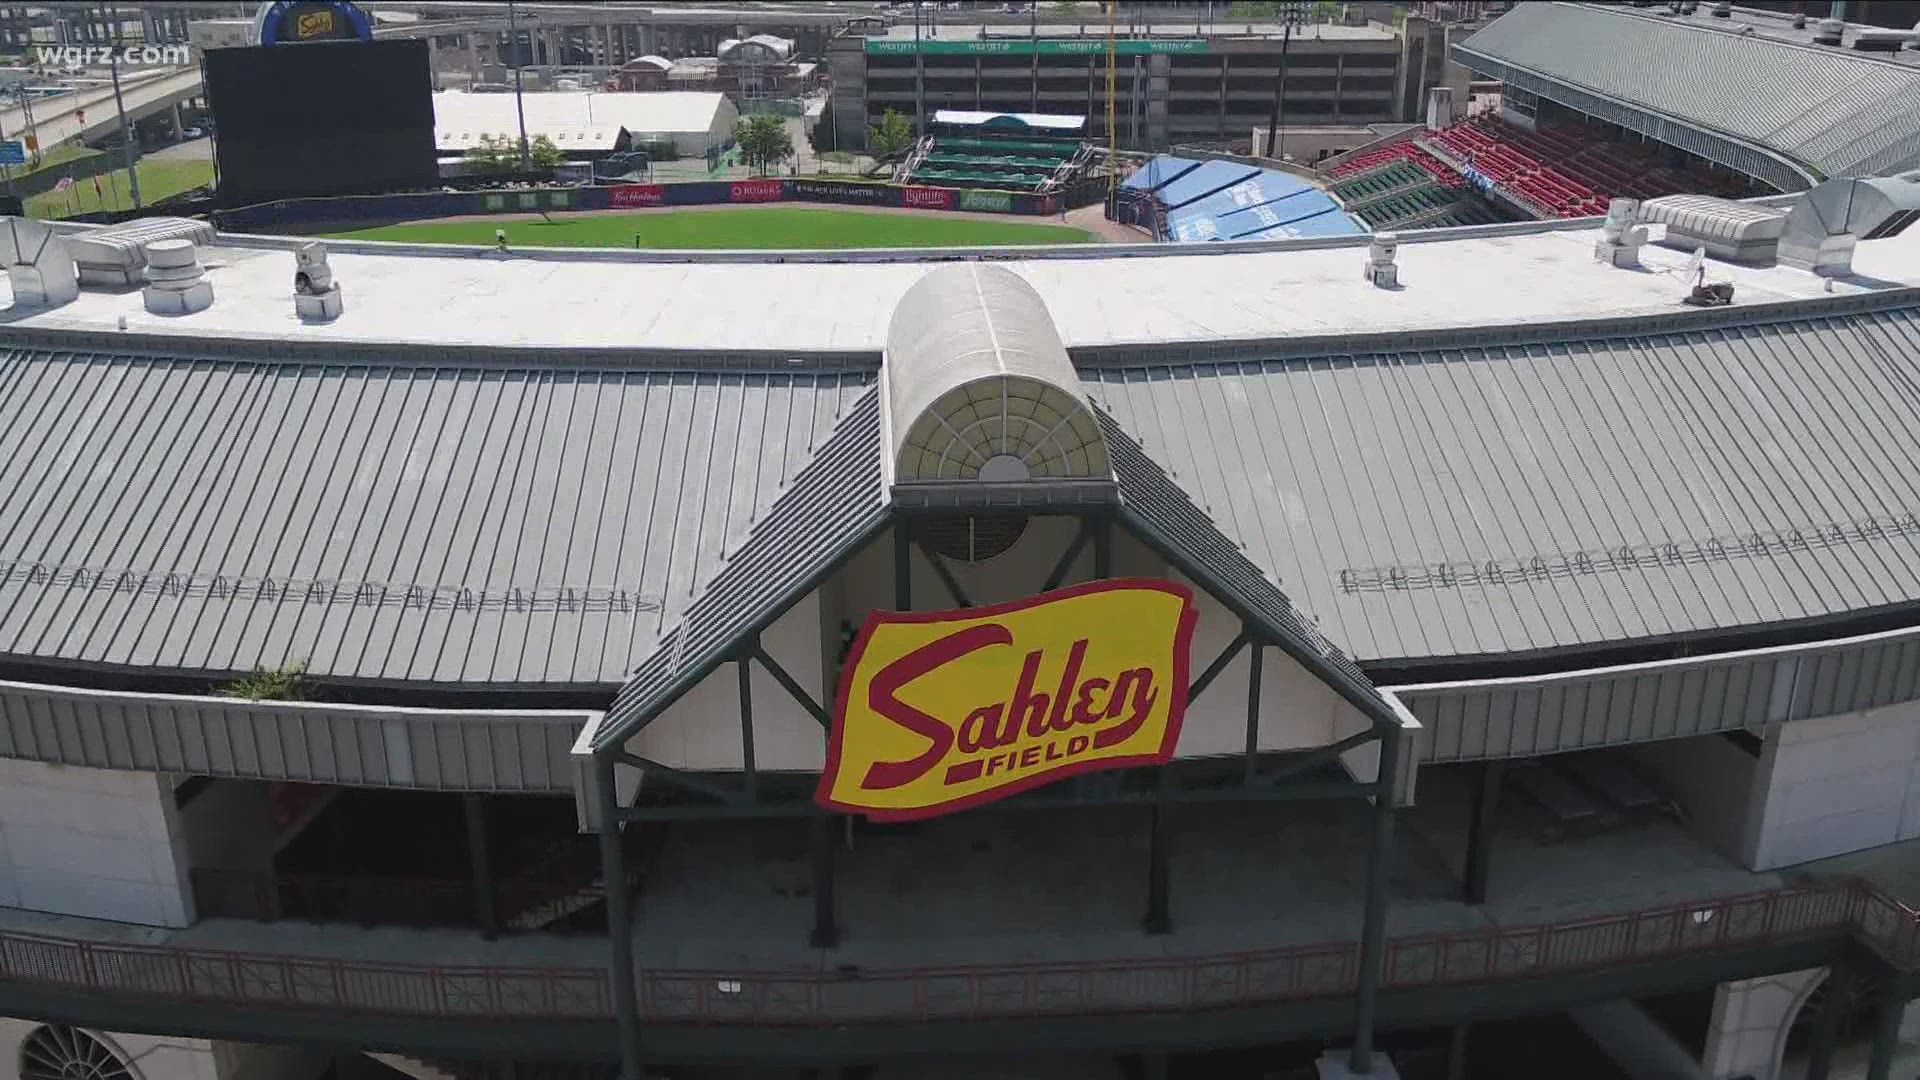 The Blue Jays just won their first "home-away-from-home" game against the Marlins over at Sahlen field.